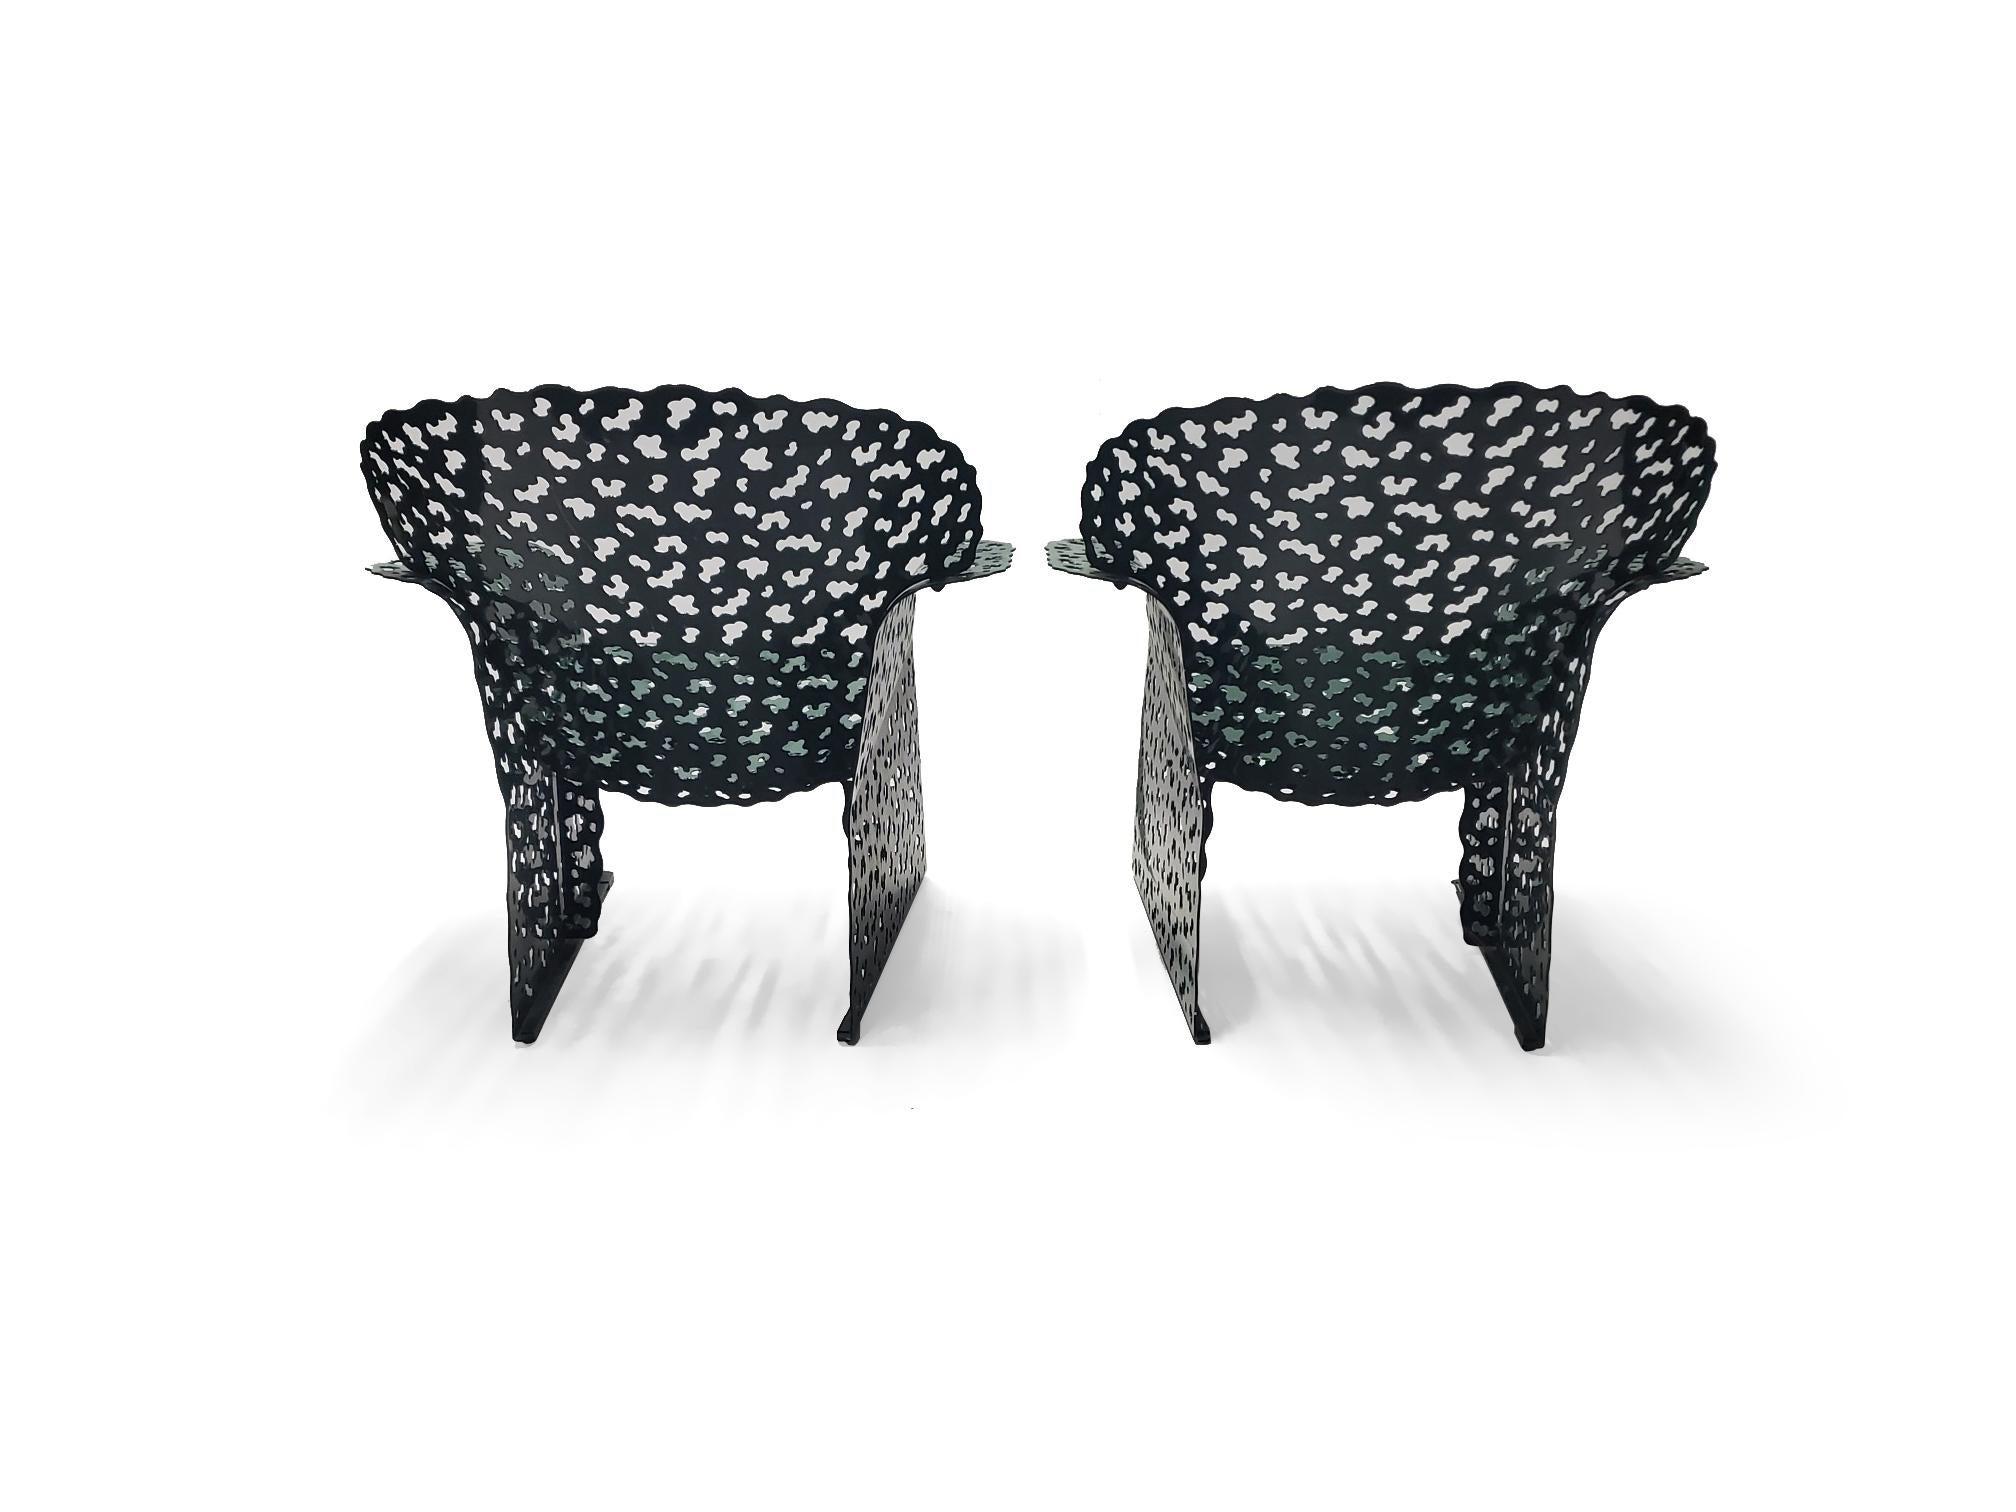 20th Century Pair of Richard Schultz for Knoll Topiary Collection Lounge Chairs 1997